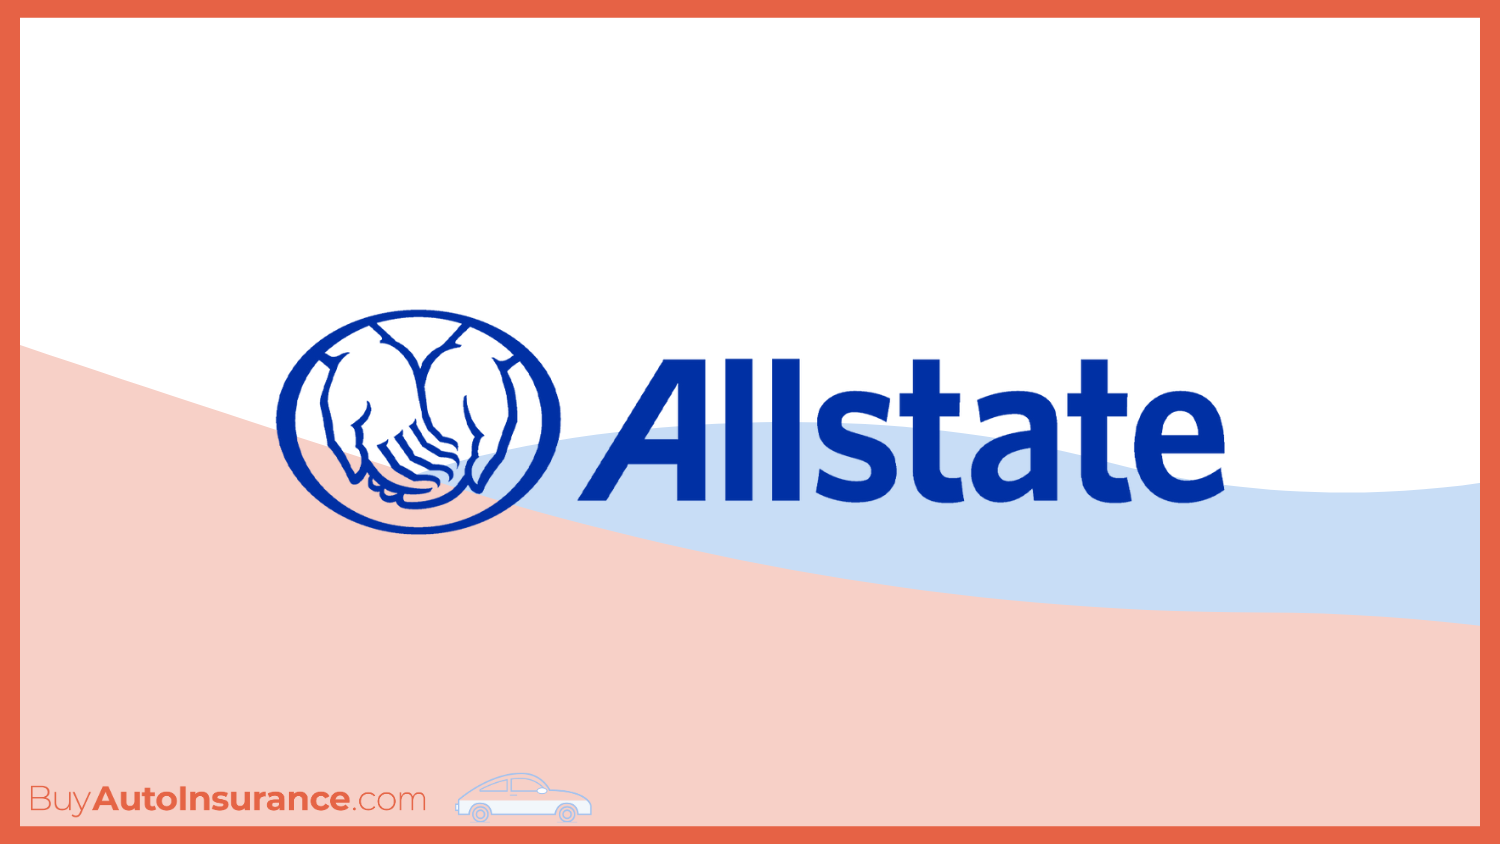 best auto insurance for postal workers: Allstate